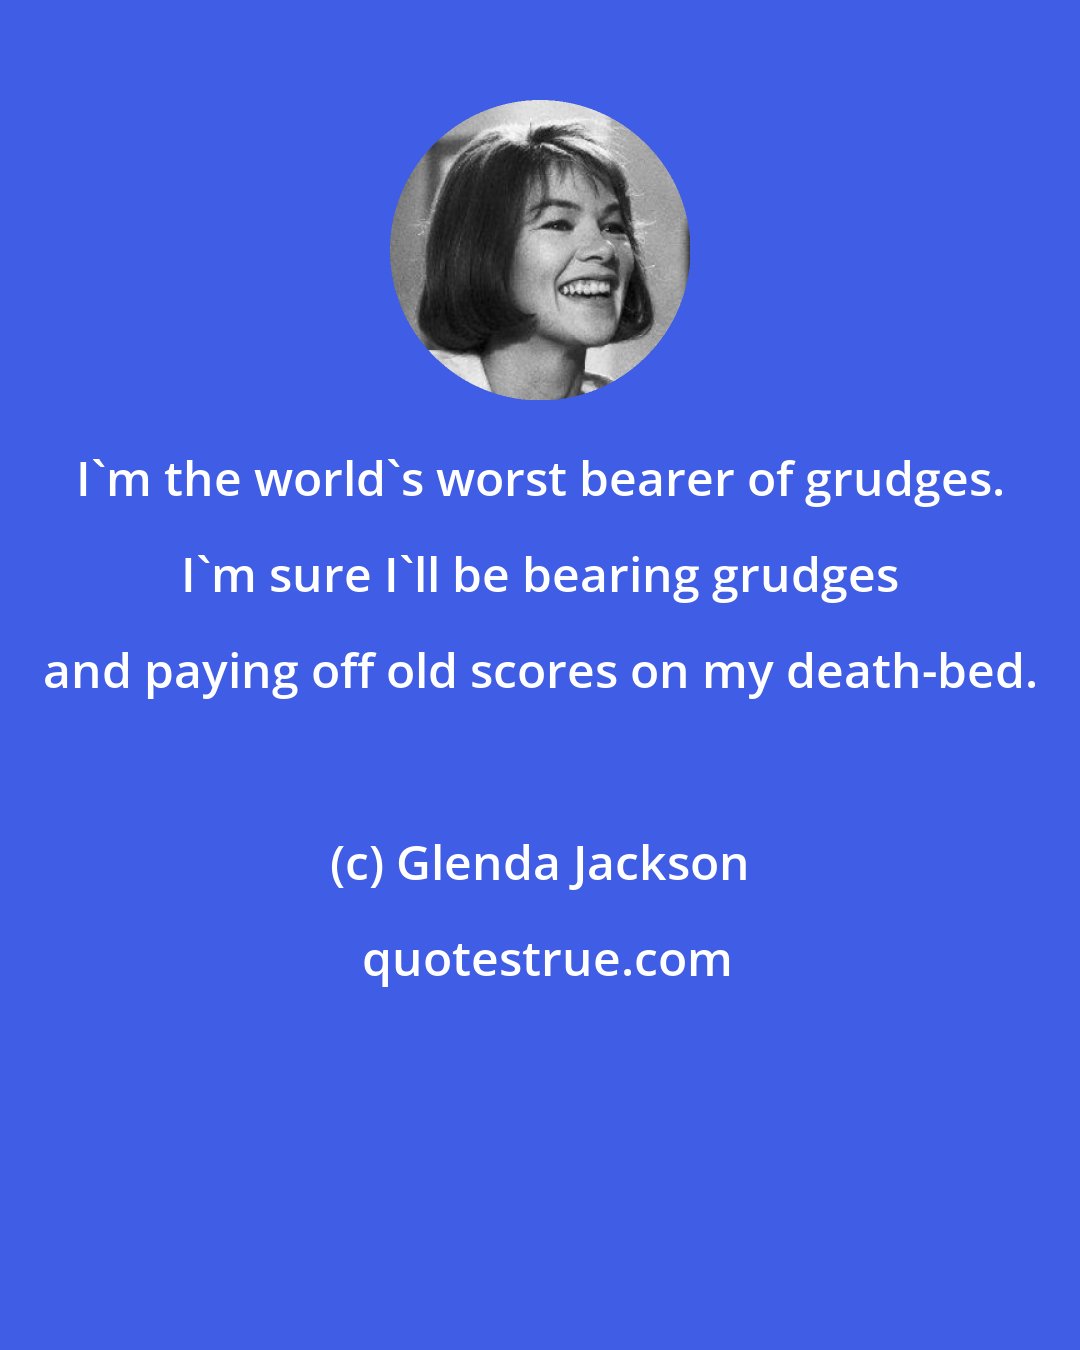 Glenda Jackson: I'm the world's worst bearer of grudges. I'm sure I'll be bearing grudges and paying off old scores on my death-bed.